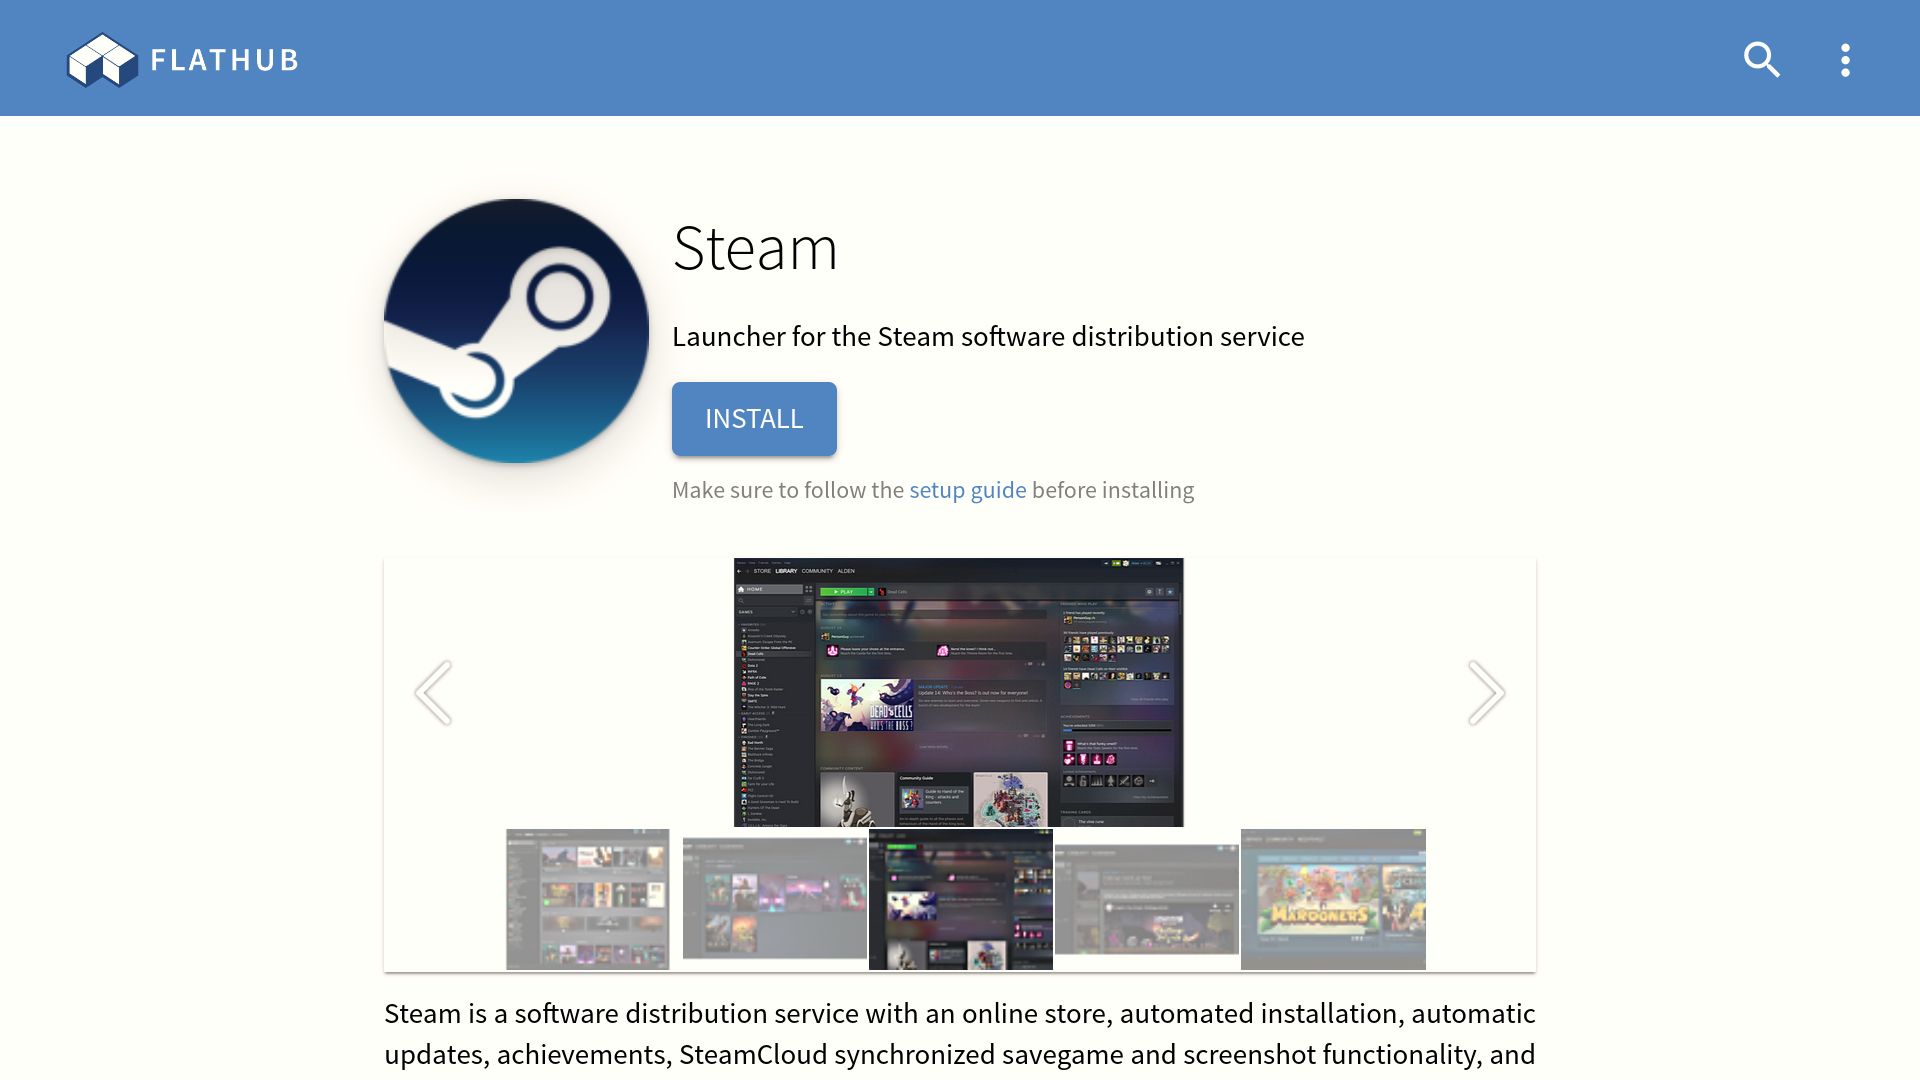 Flathub's download and install page for Steam Flatpak version